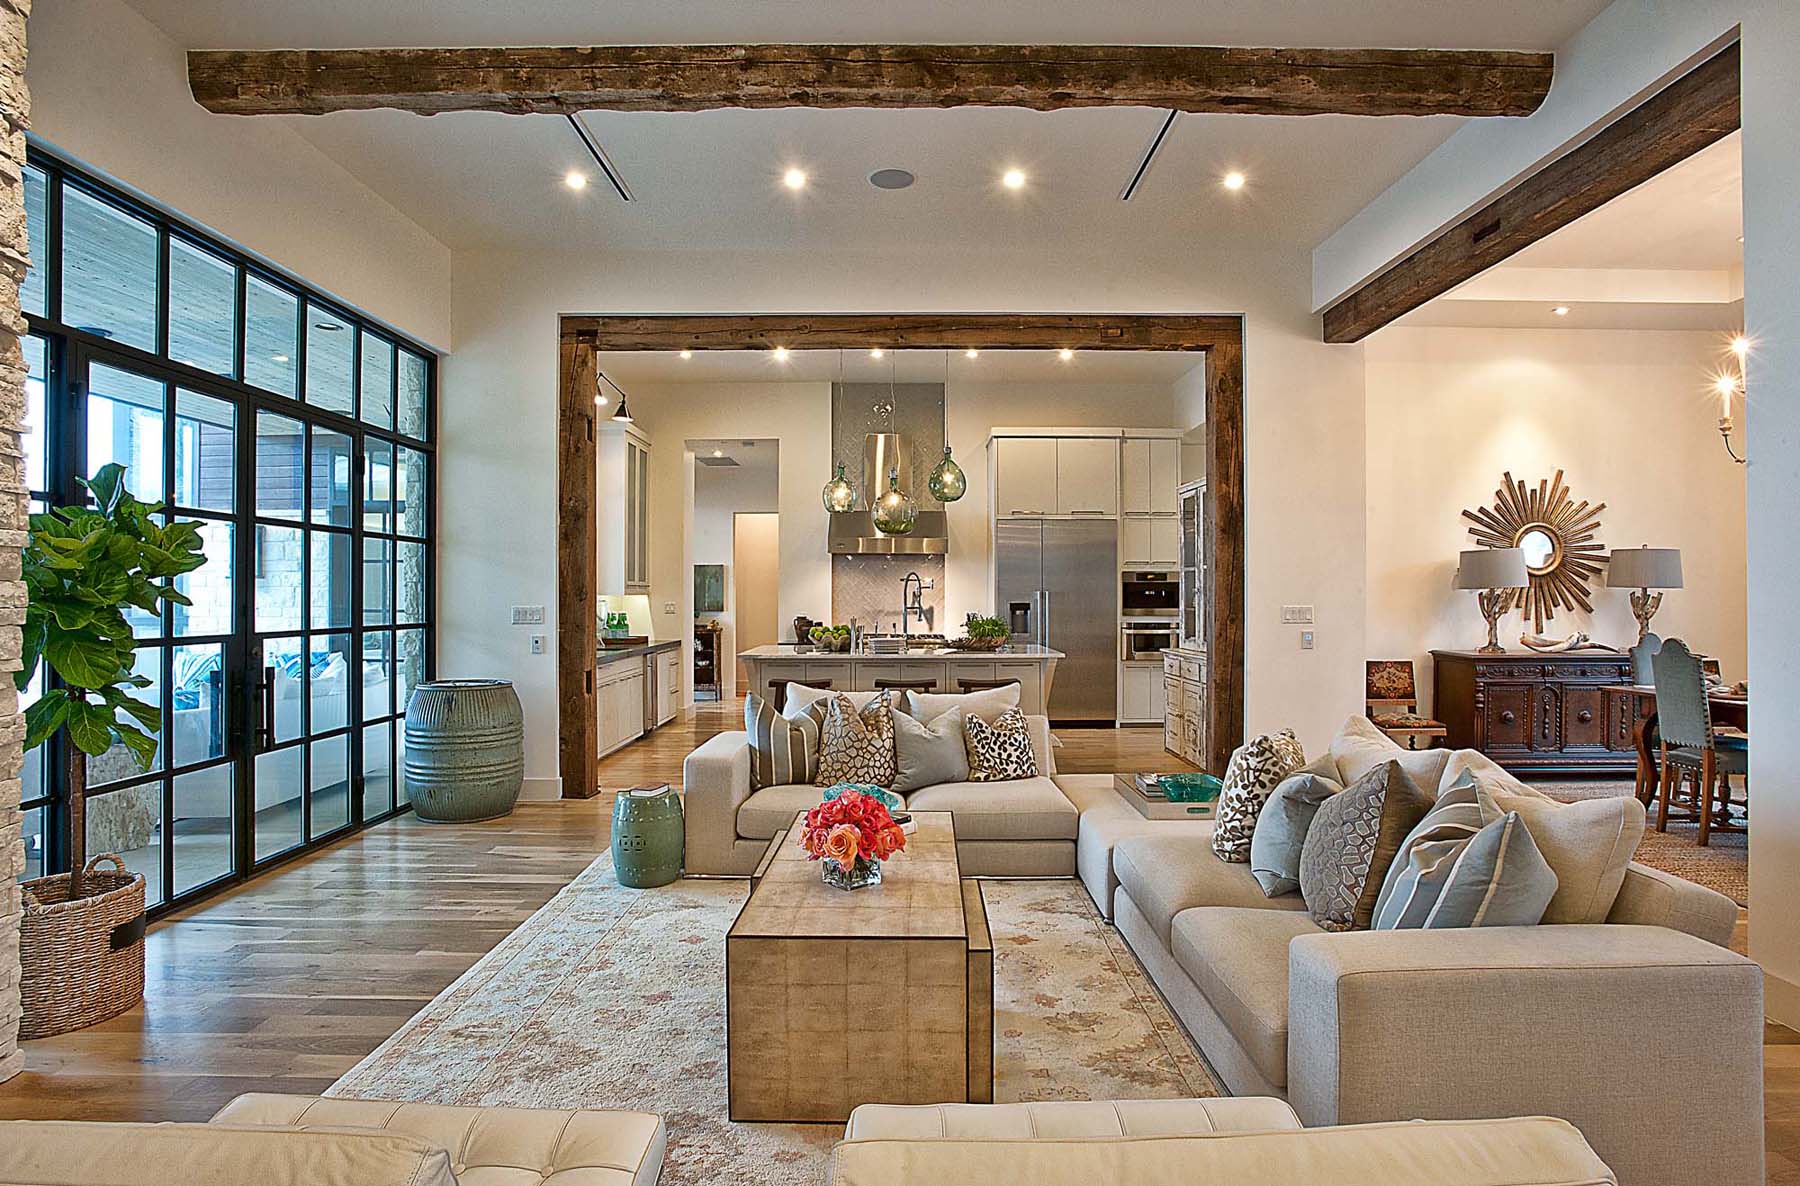 A Contemporary Home With Rustic Elements Connects To Its